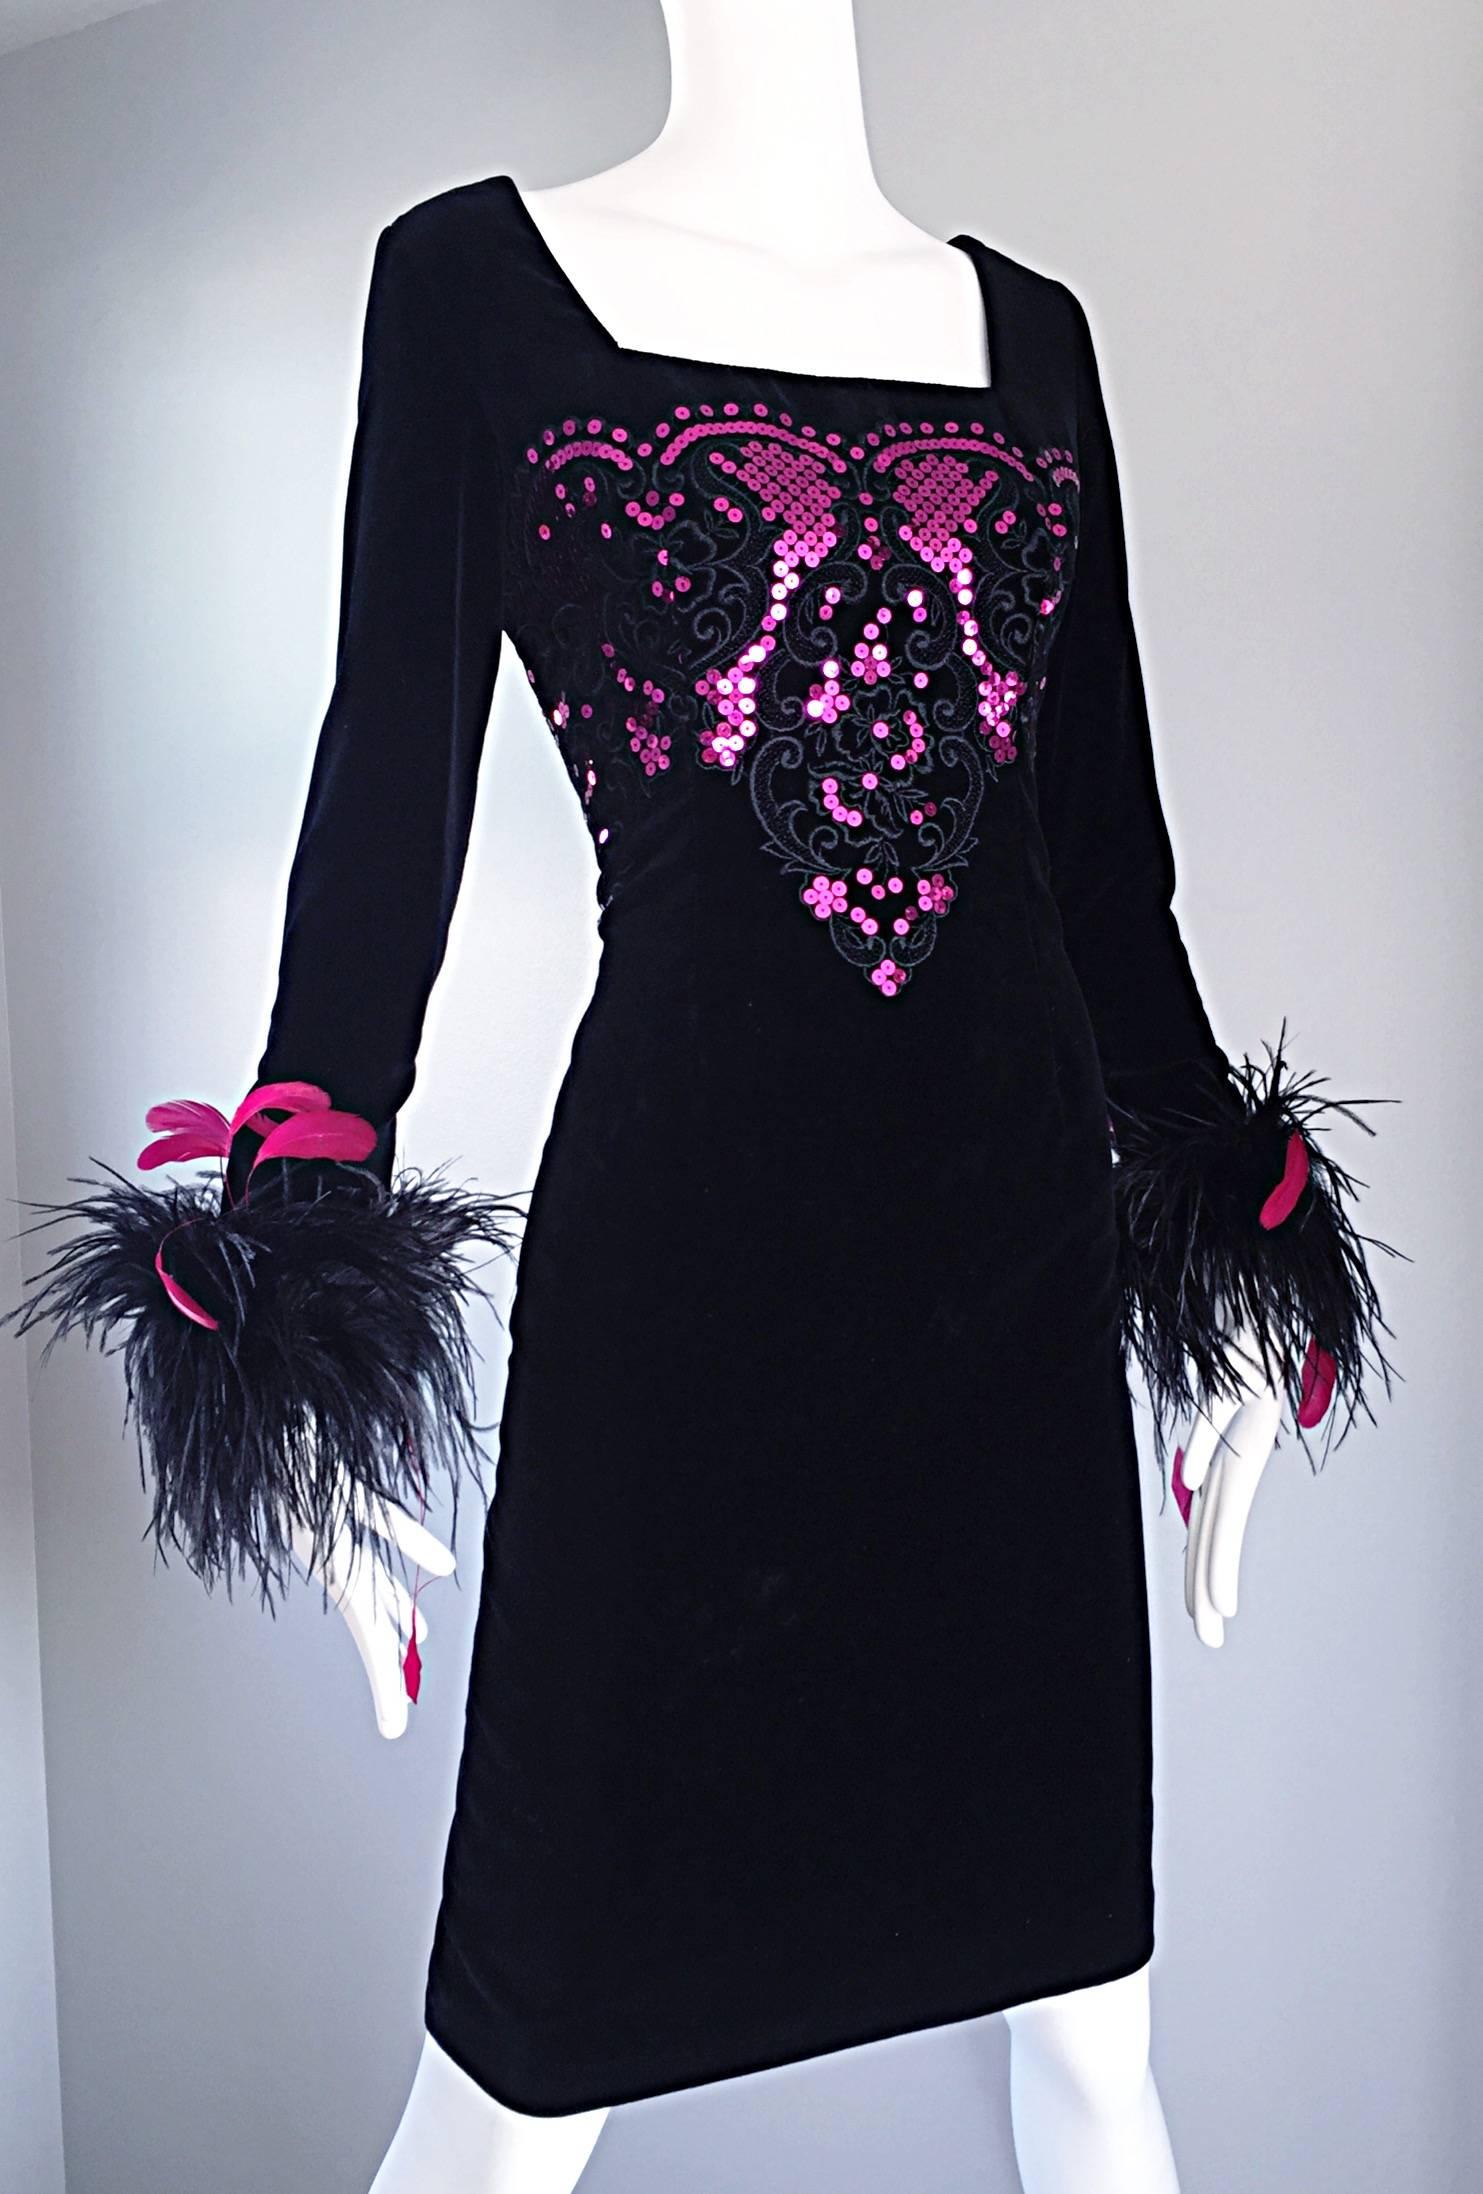 Women's Albert Nipon for I Magnin Vintage Black and Pink Sequin Ostrich Feather Dress